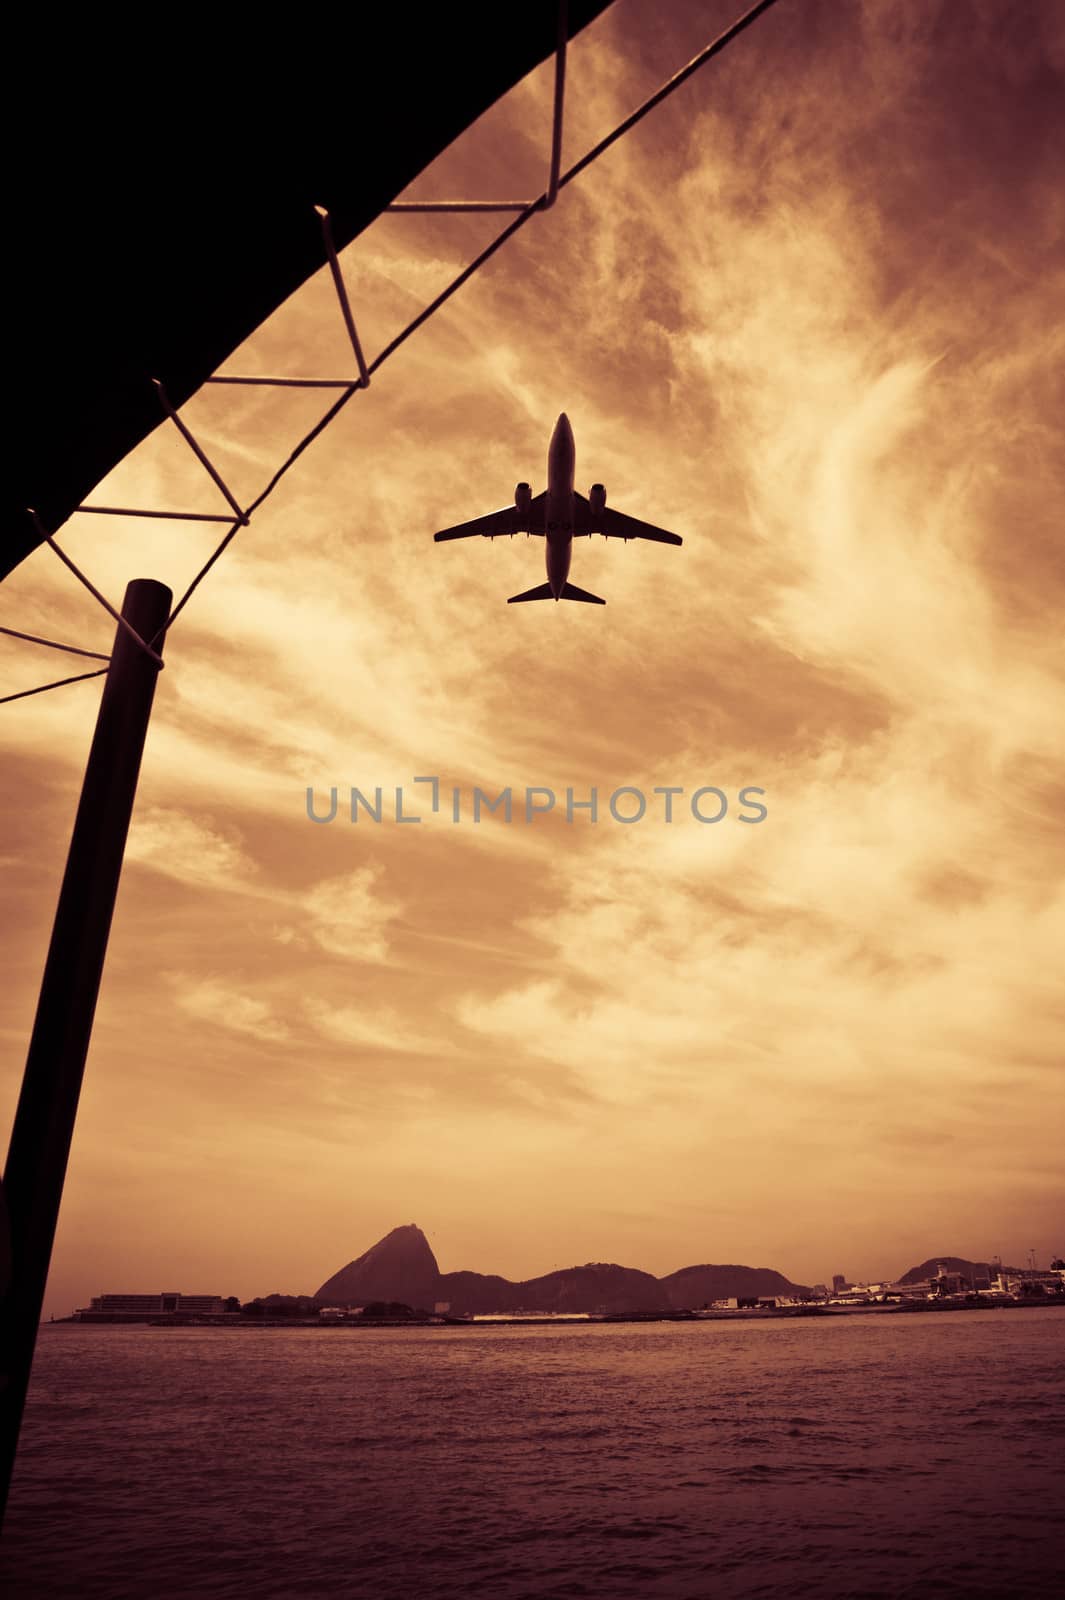 Sepia view of aircraft flying over sea with coastline of Rio de Janeiro in background, Brazil.